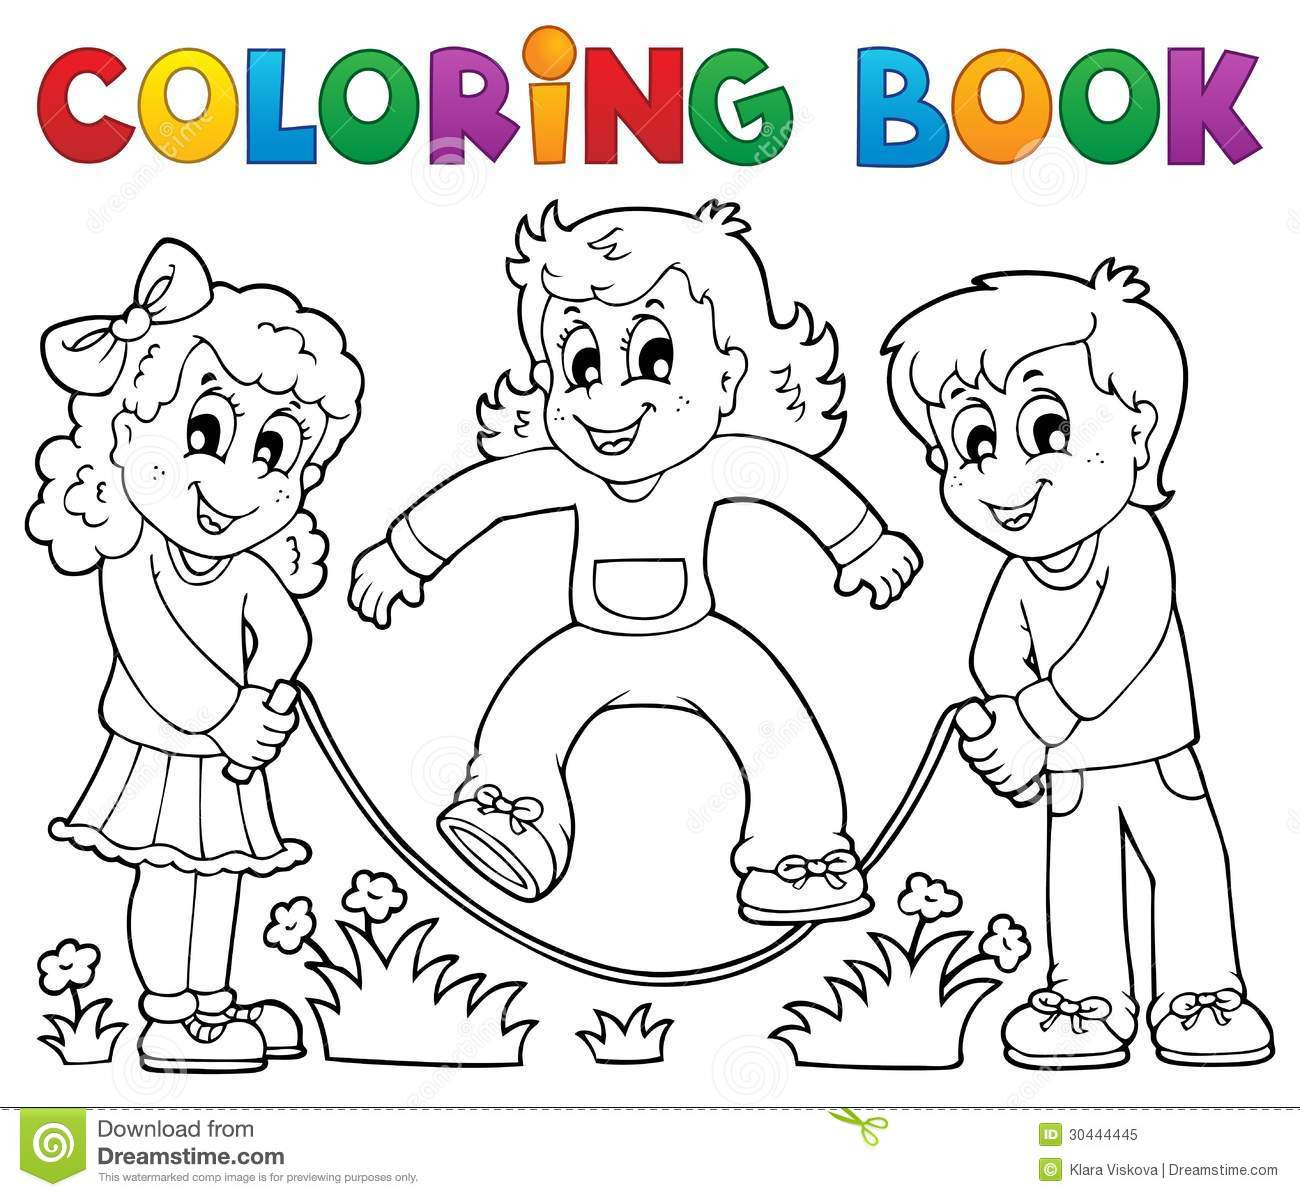 Coloring Book Kids
 Coloring Book Kids Play Theme 1 Royalty Free Stock